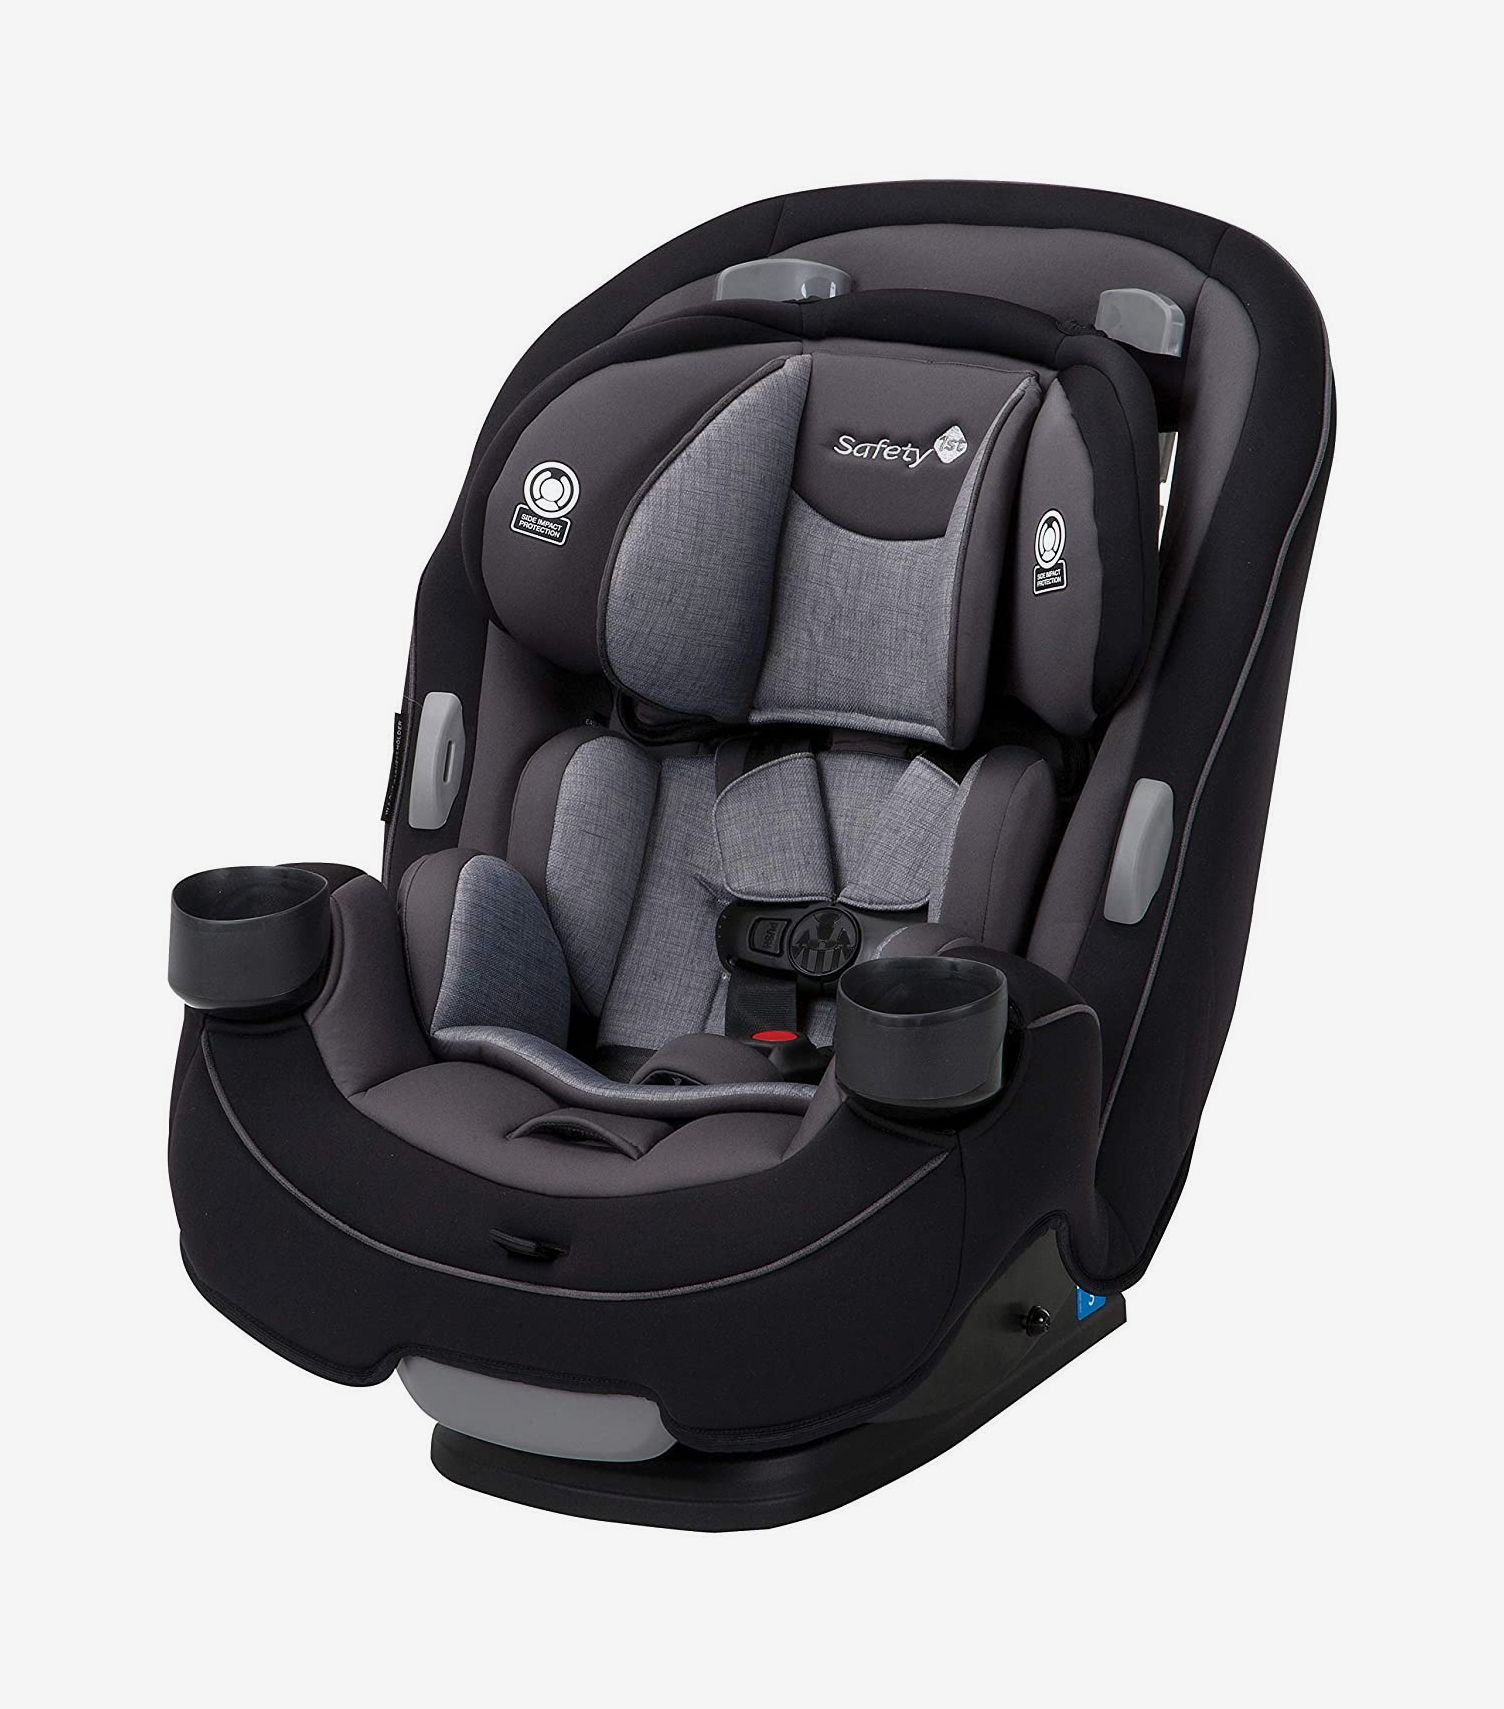 25 Best Infant Car Seats And Booster 2020 The Strategist - Top Infant Car Seats 2020